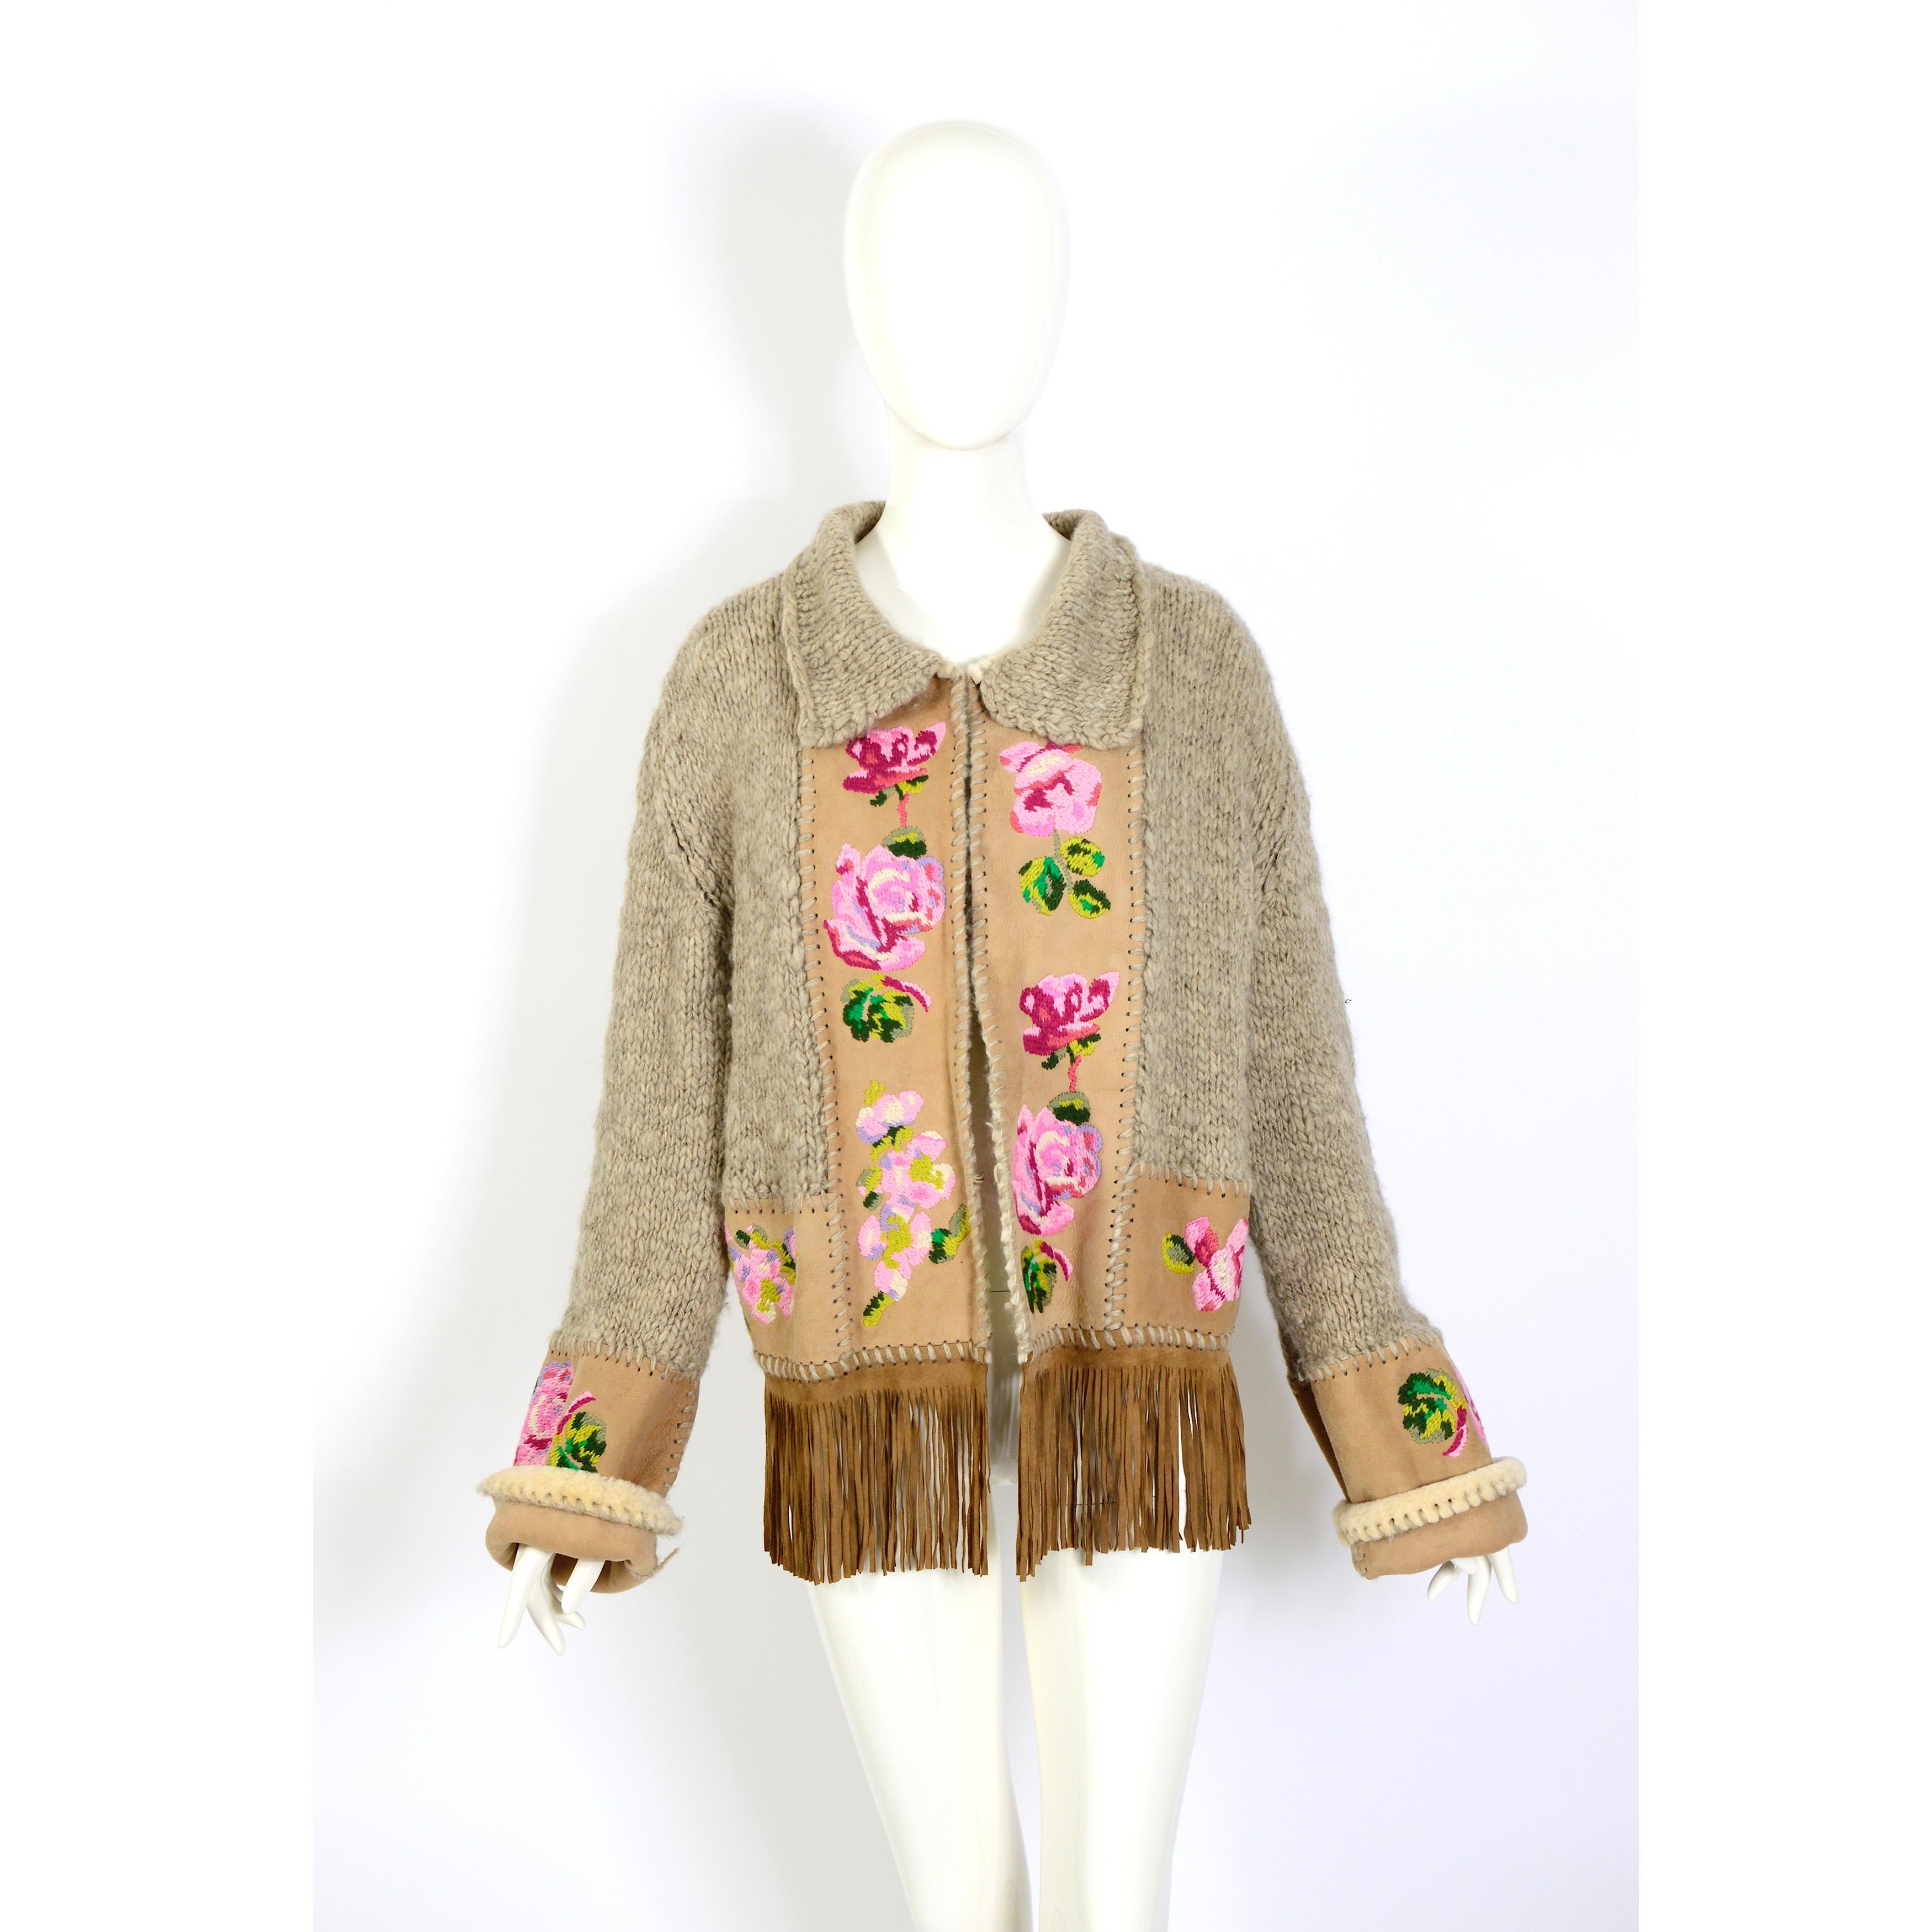 Exquisite and rare Christian Dior by John Galliano wool & embroidered shearling cardigan with Fringe! 
From the Christian Dior Fall 2000 runway show and a one-of-a-kind collector's item! 

Material shearling & wool - Size XL

Measurements are taken